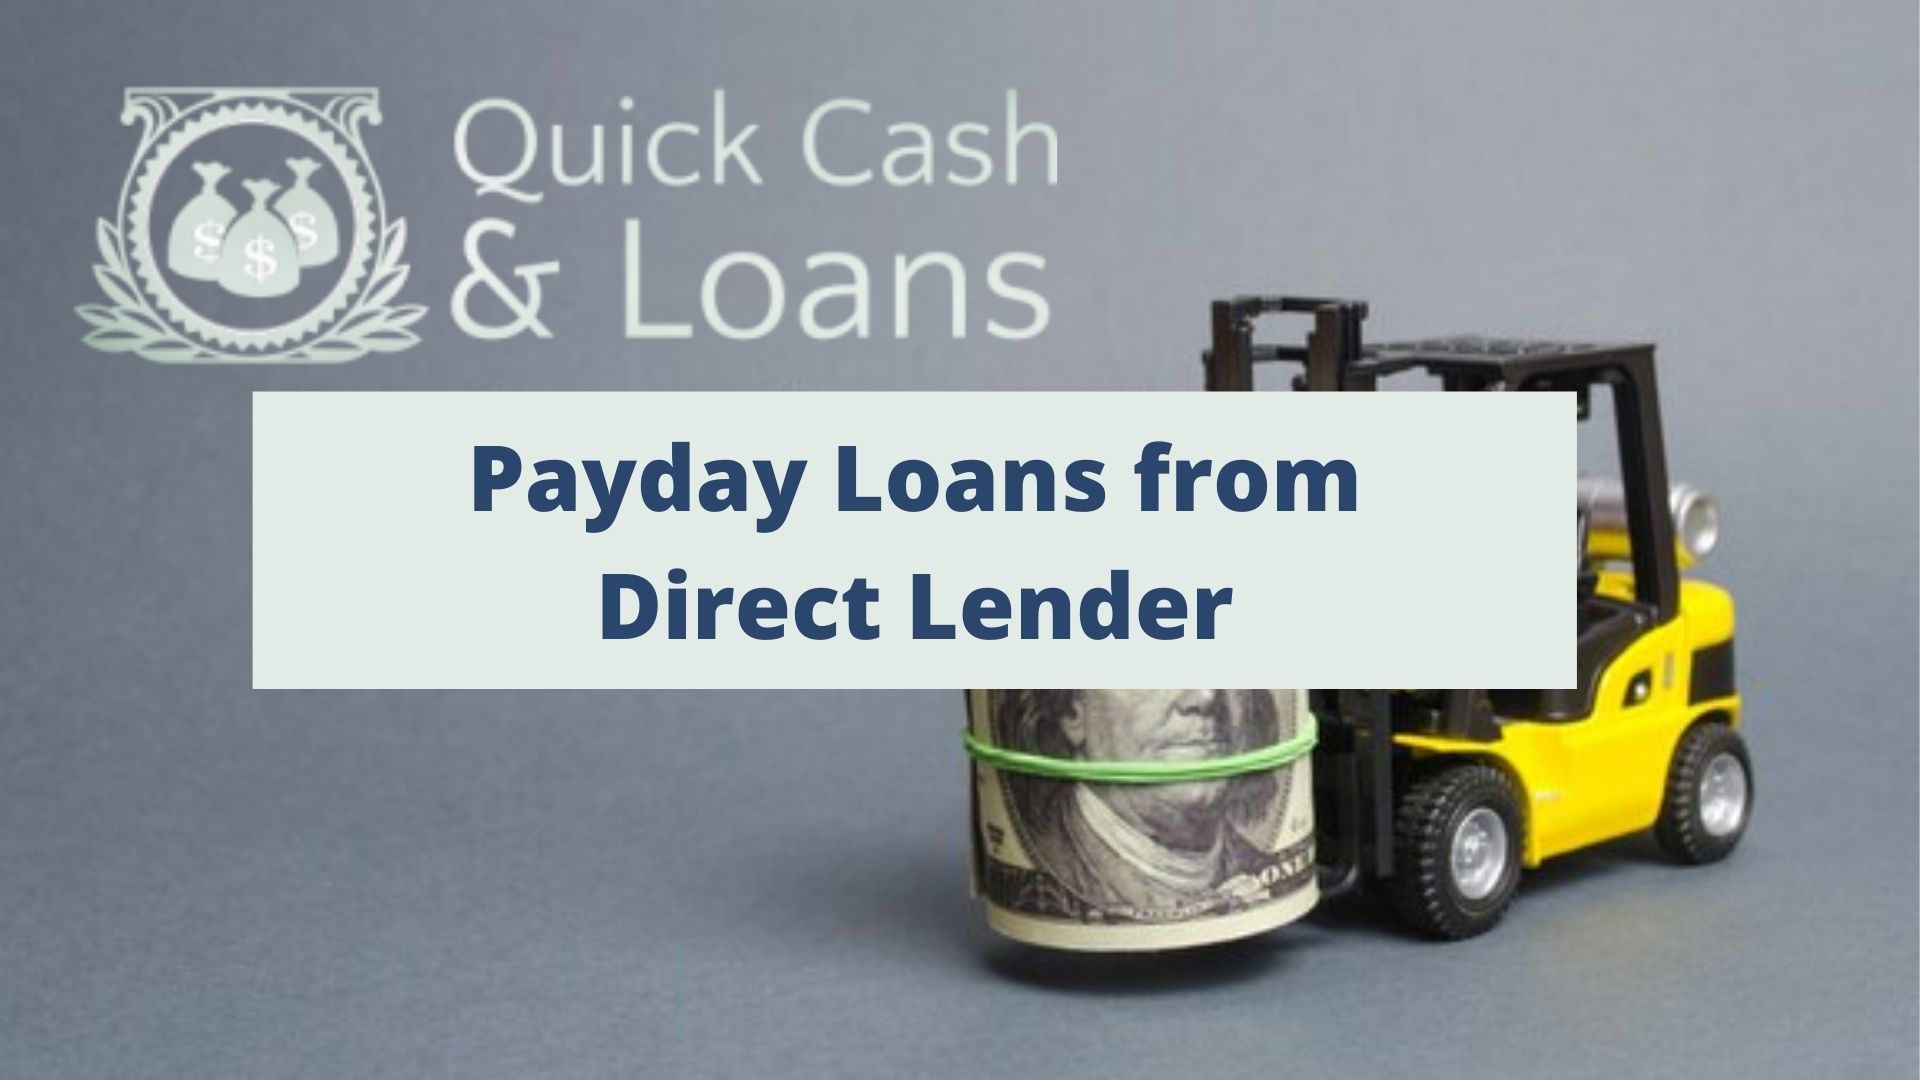 Payday Loans from Direct Lenders